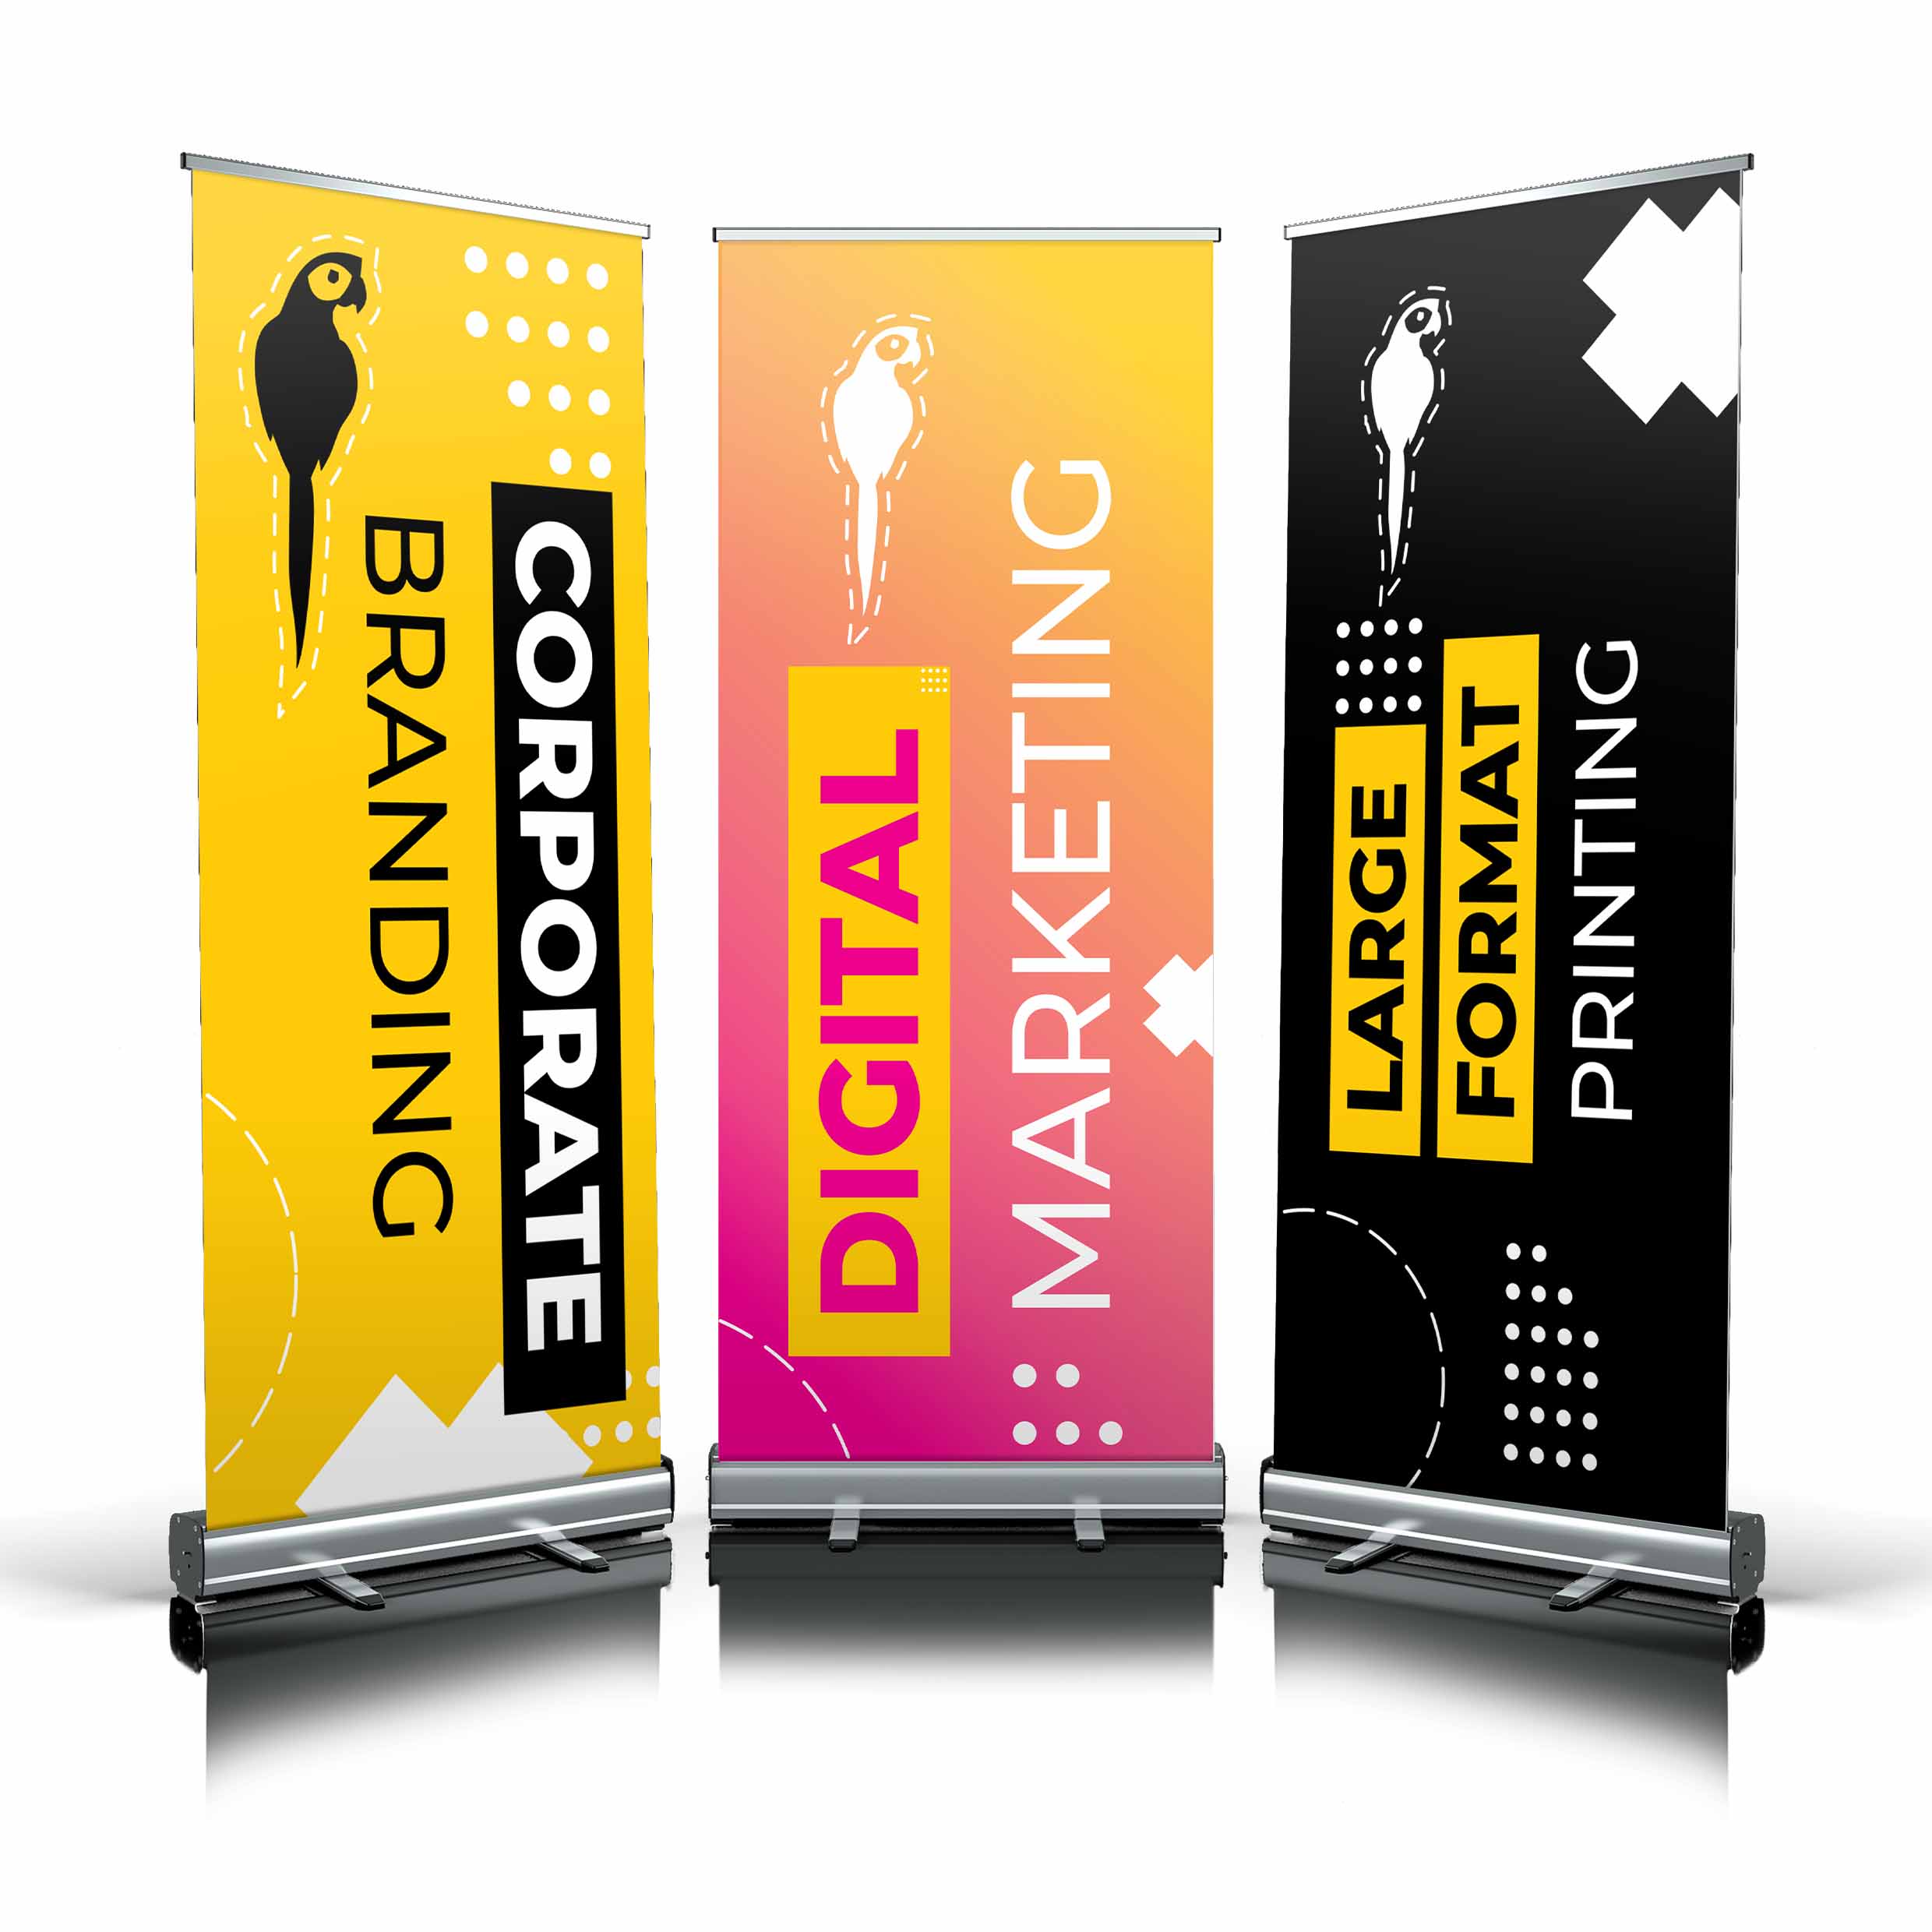 Large format design for the best graphics design in Juba